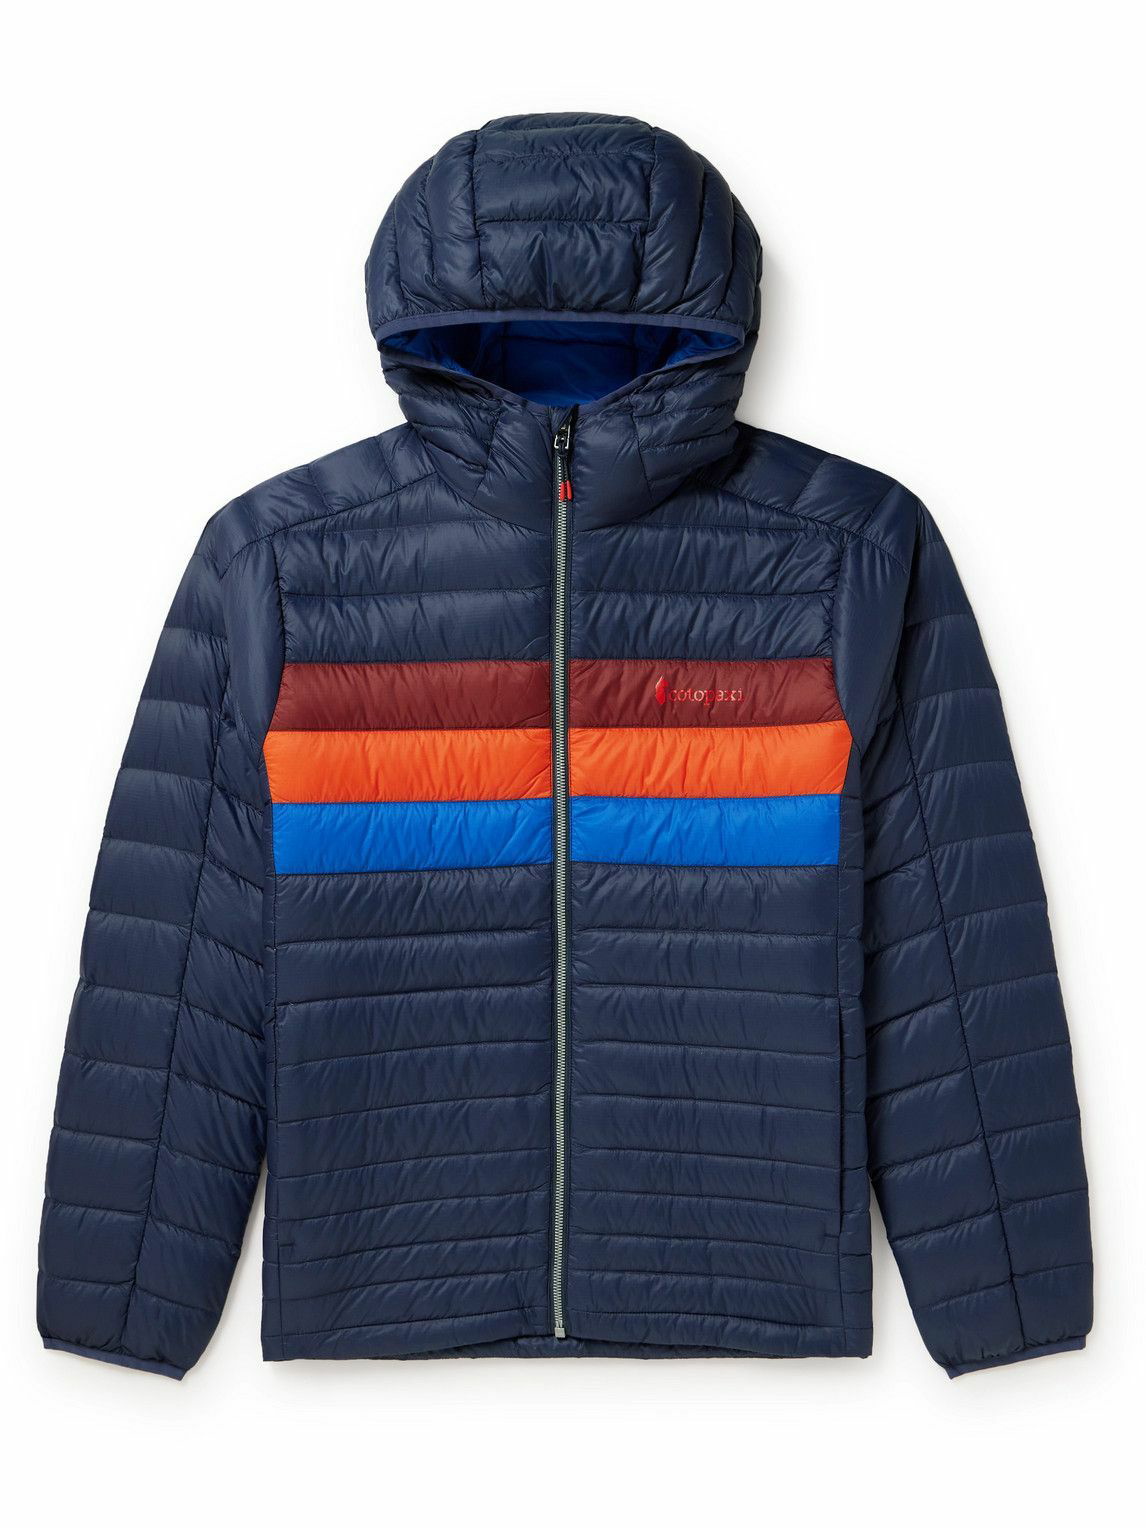 Cotopaxi Men's Fuego Down Hooded Jacket in Maritime/Saltwater Cotopaxi